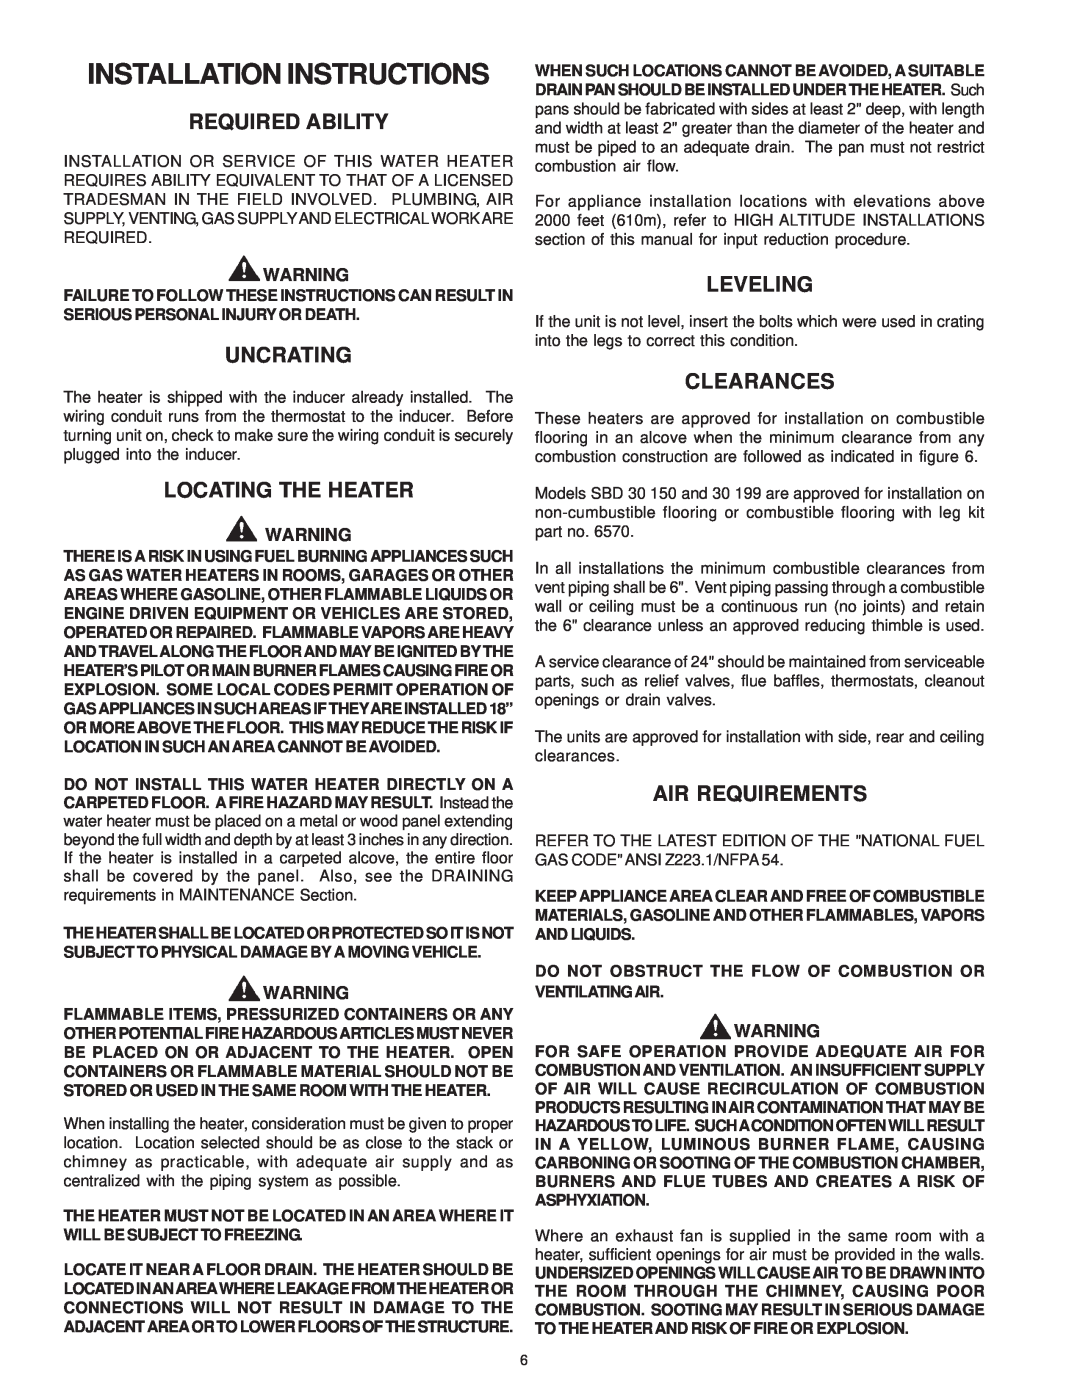 A.O. Smith SBD 30 150 Installation Instructions, Required Ability, Uncrating, Locating The Heater, Leveling, Clearances 